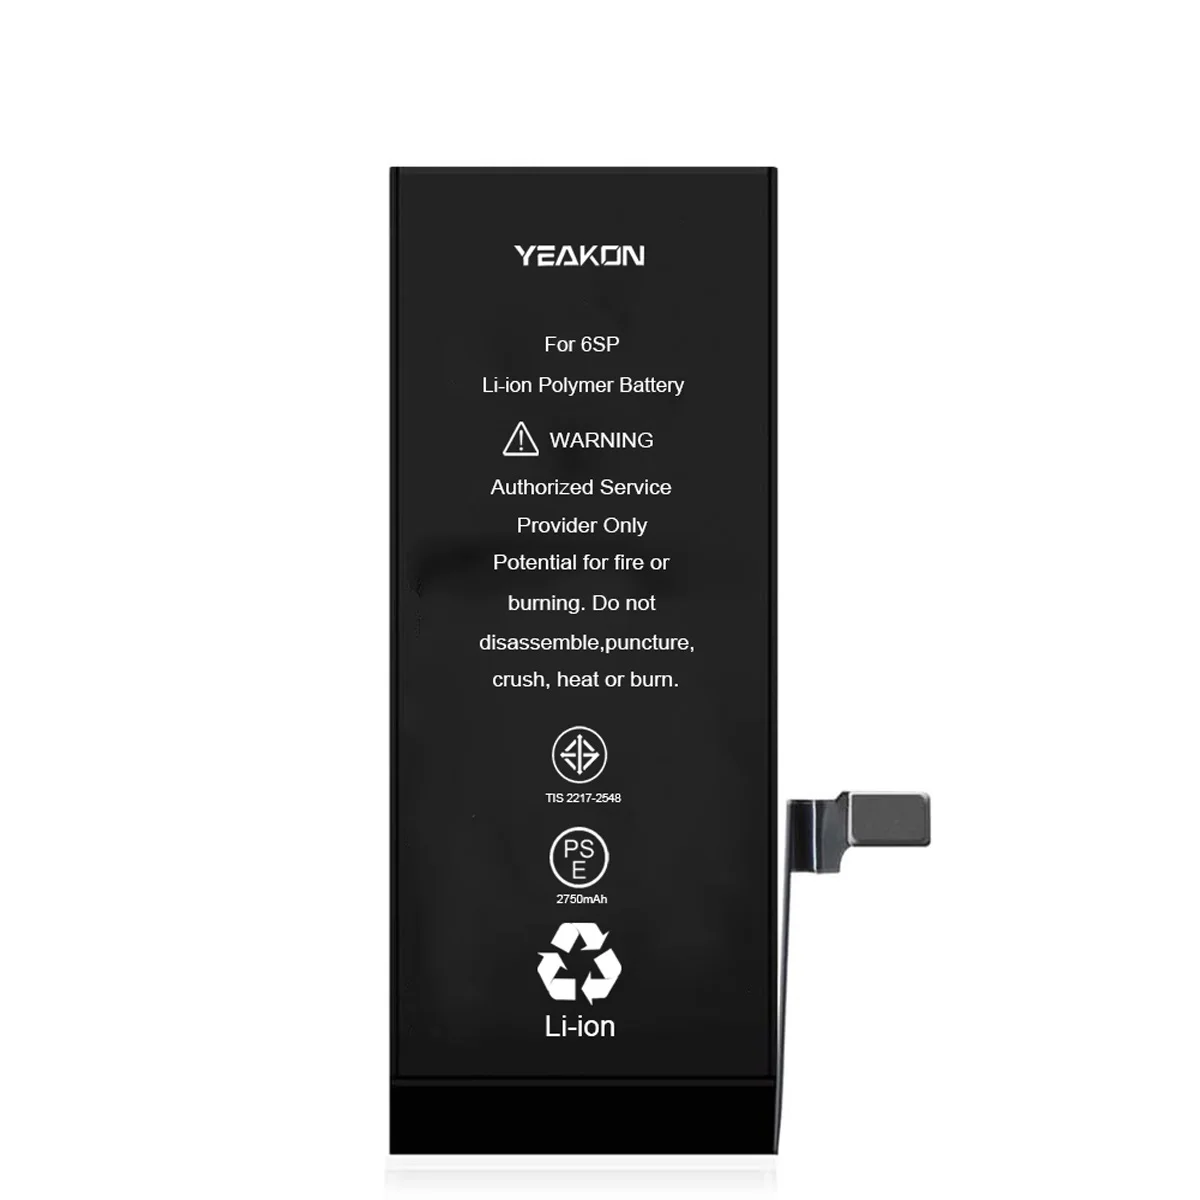 

YEAKON 6S Plus Battery Replacement For iPhone 5 5S 5C SE 6 6S 6P 6SP 7 7G 7P 8 8G 8P Plus X XS MAX XR 11 12 13 Pro MAX Batteries